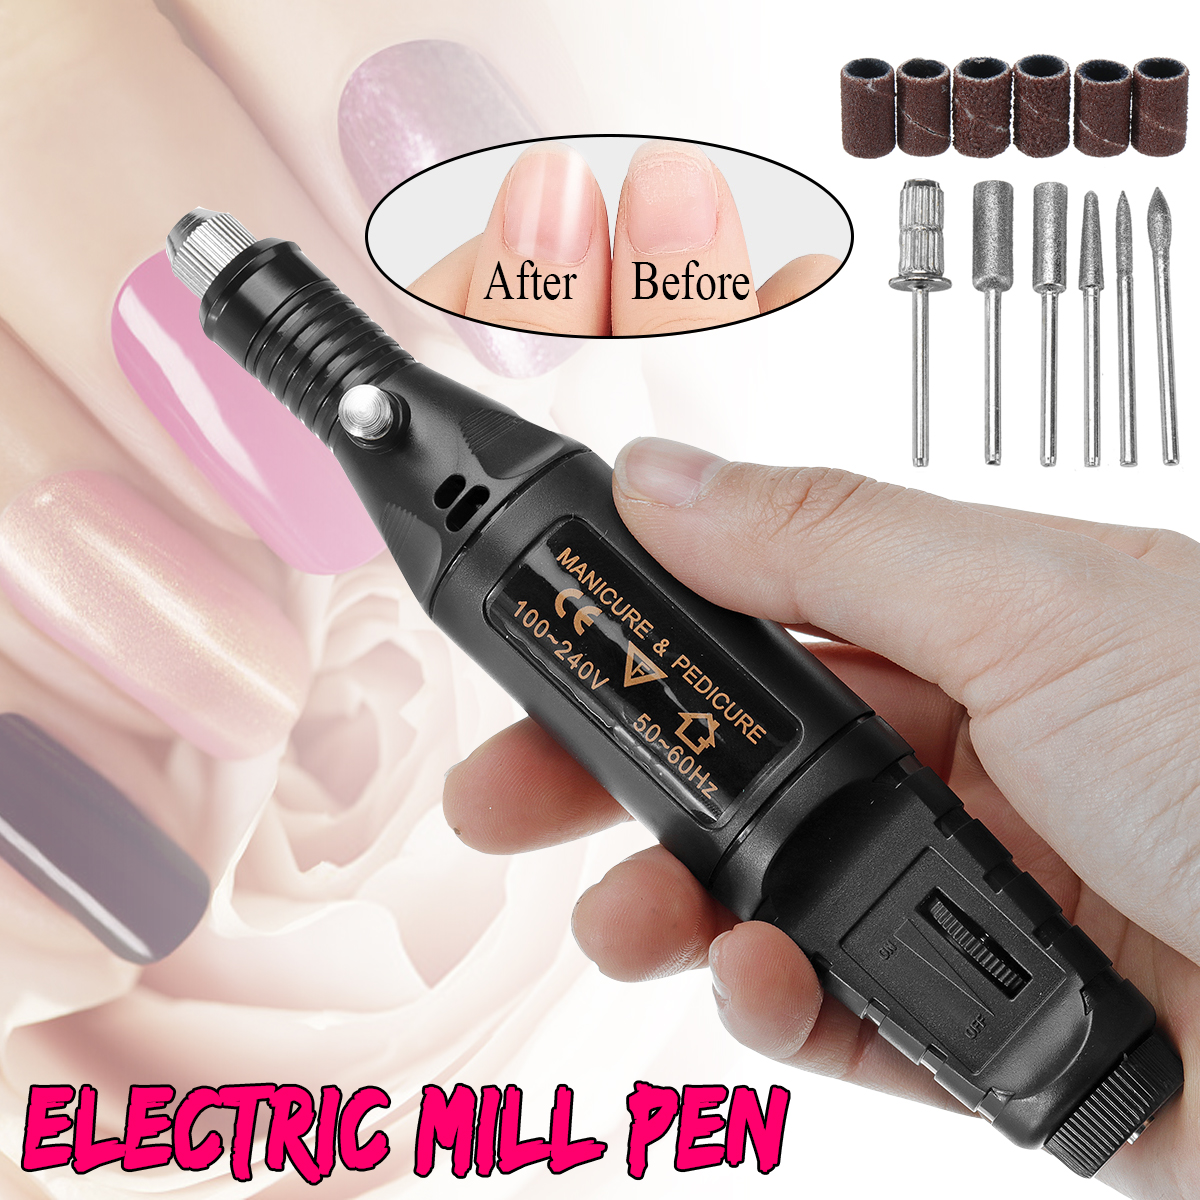 Mini-Electric-Grinder-USB-Engraving-Pen-Grinding-Milling-Rotary-Drill-Trimming-Polishing-Drilling-Cu-1419457-2